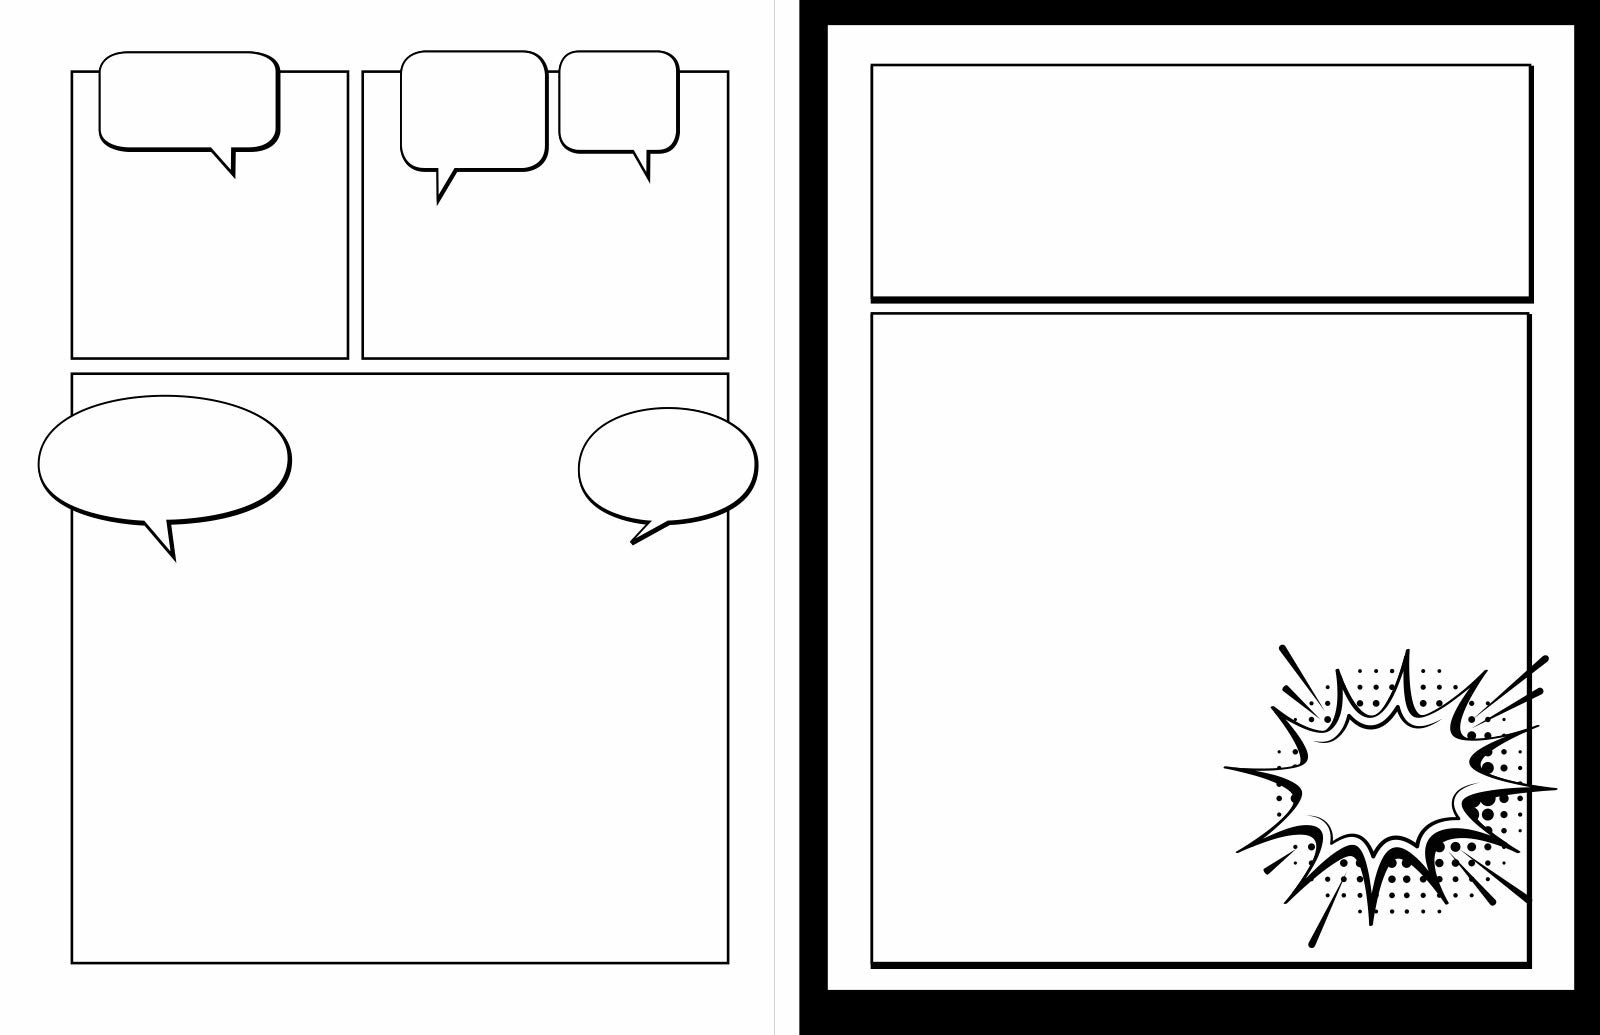 Two blank comic panels with speech bubbles